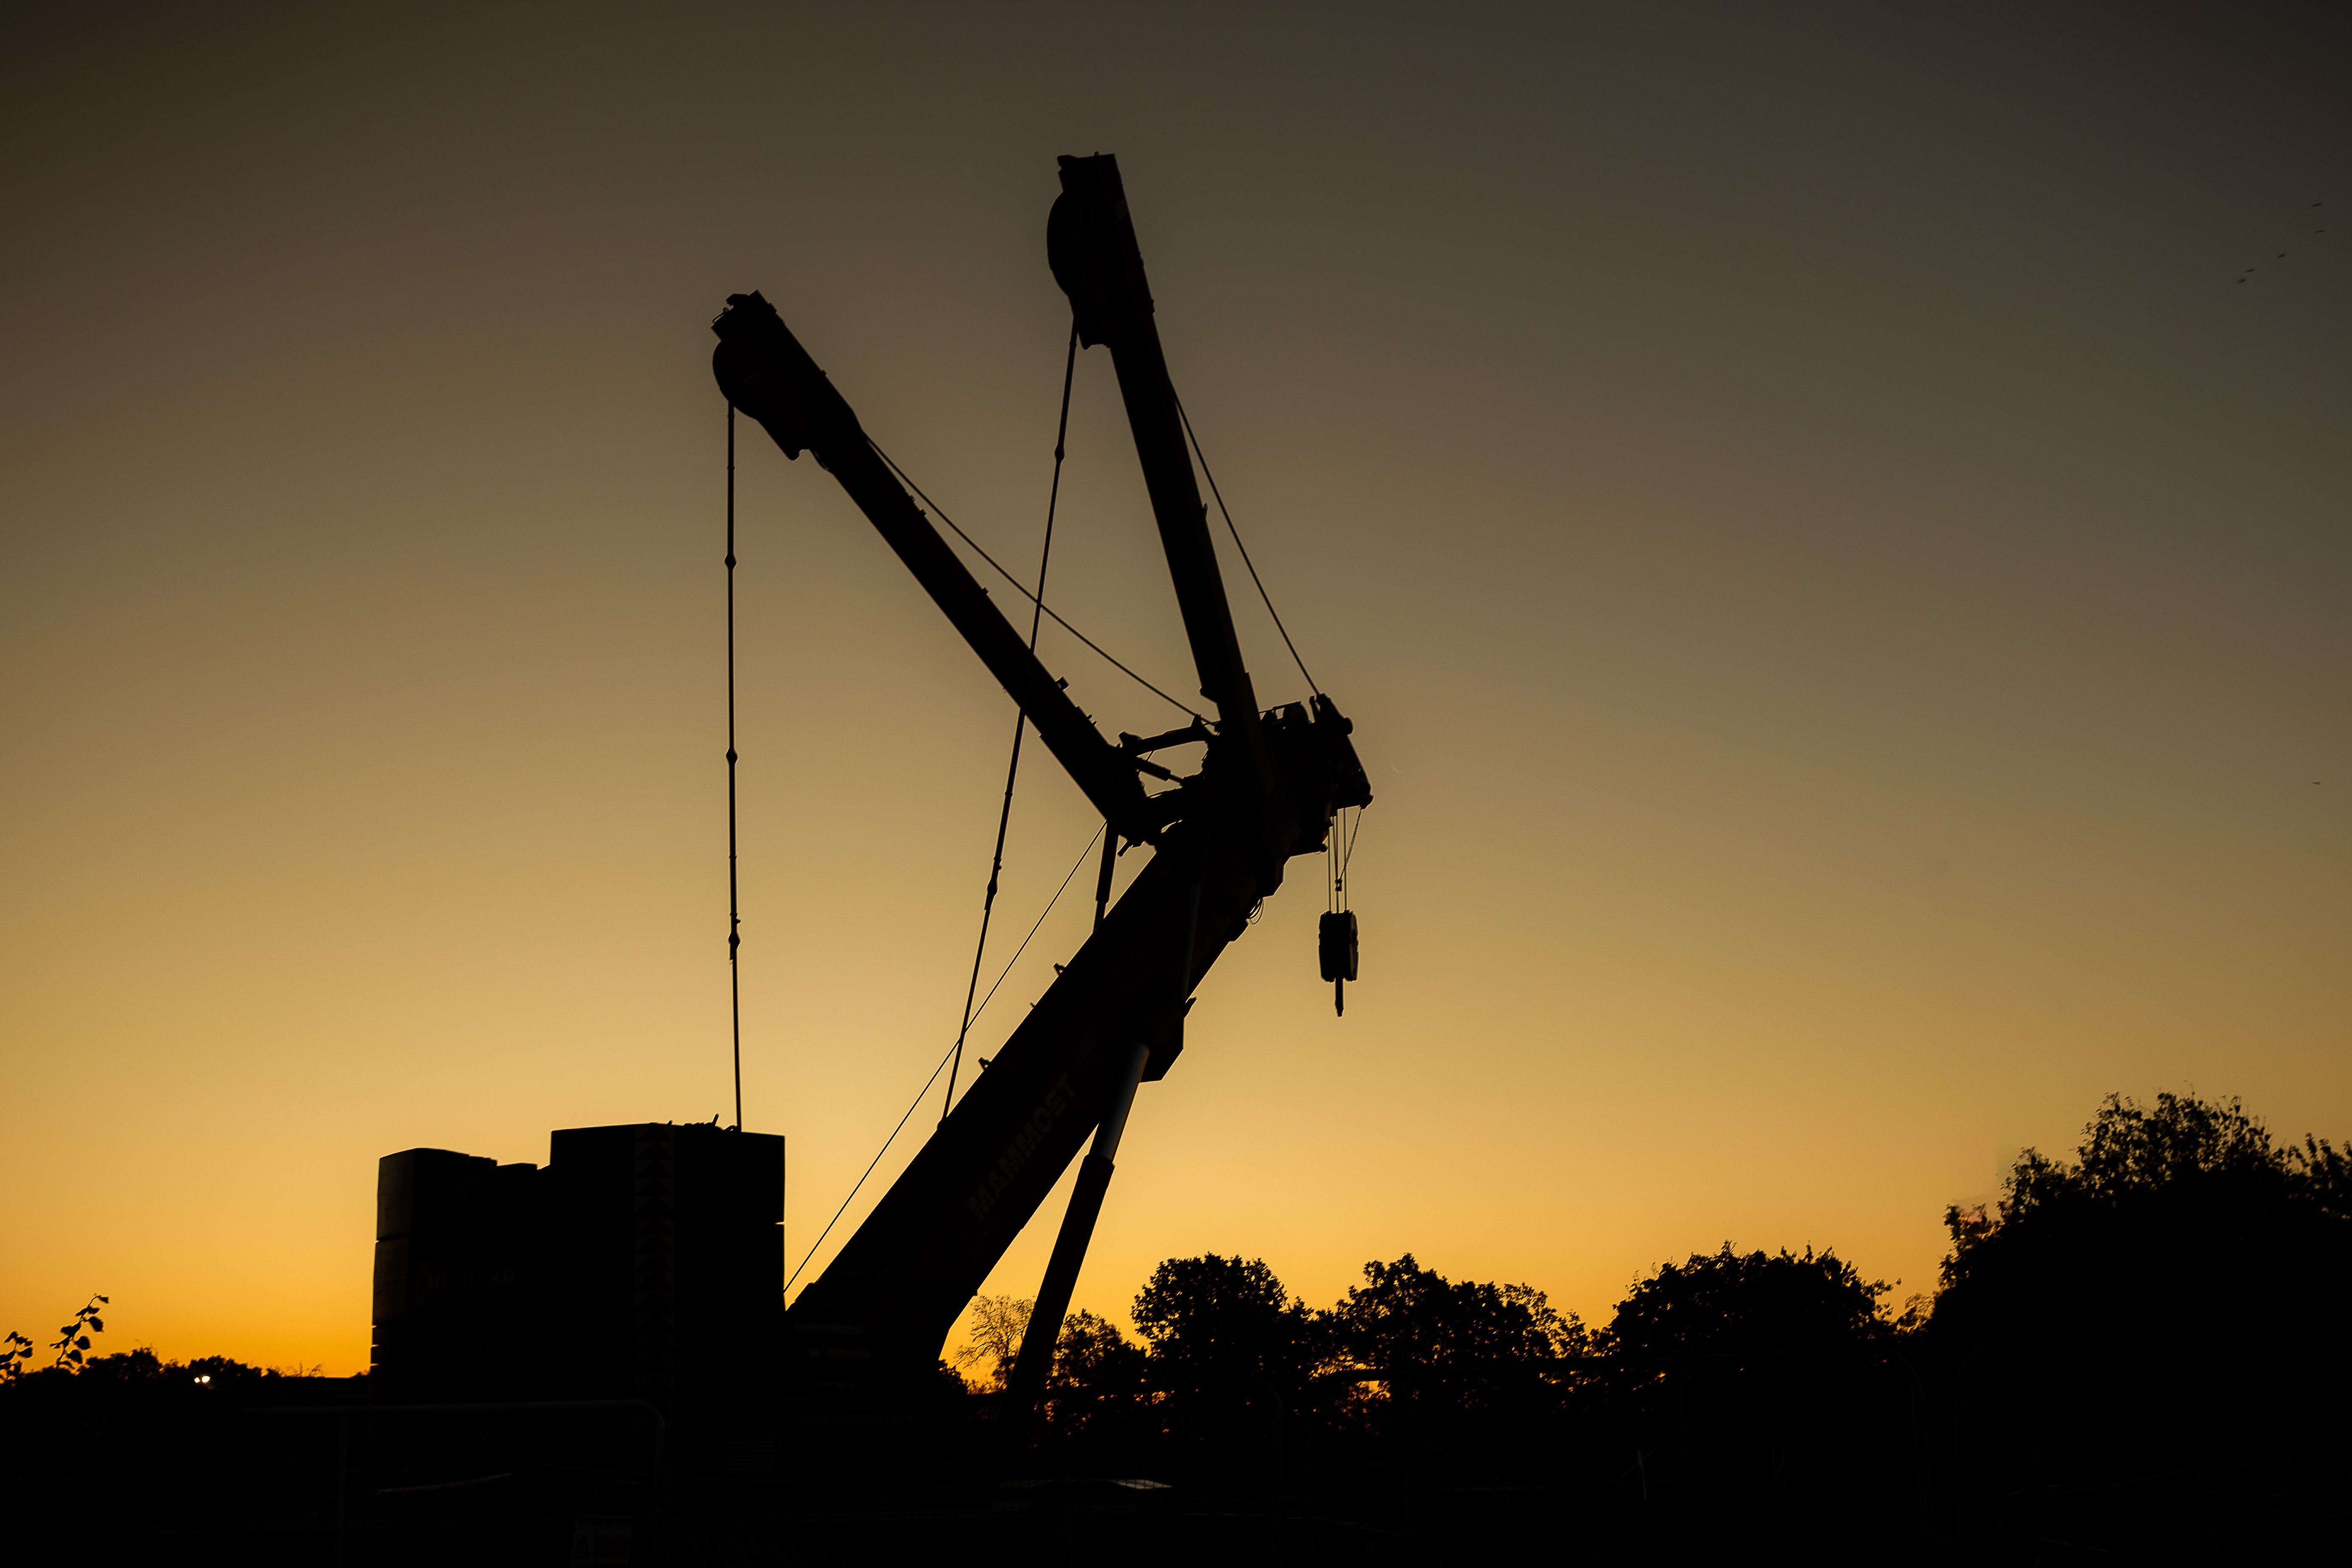 crane in foreground silhouetted against sunrise